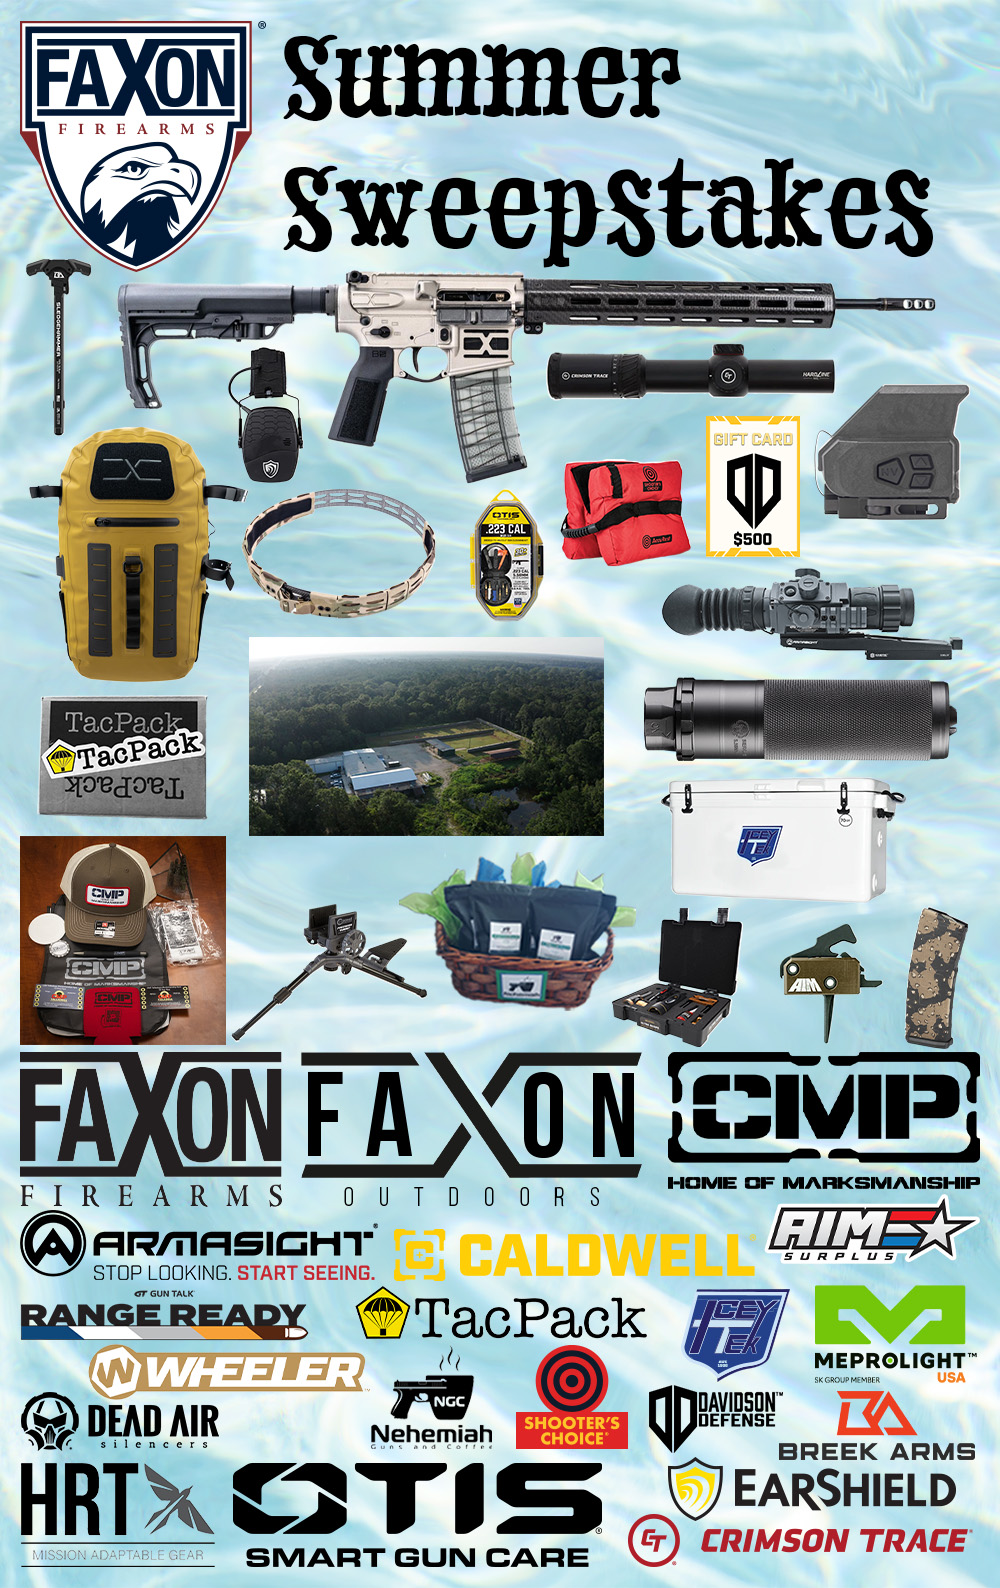 enter in the faxon firearms sweepstakes